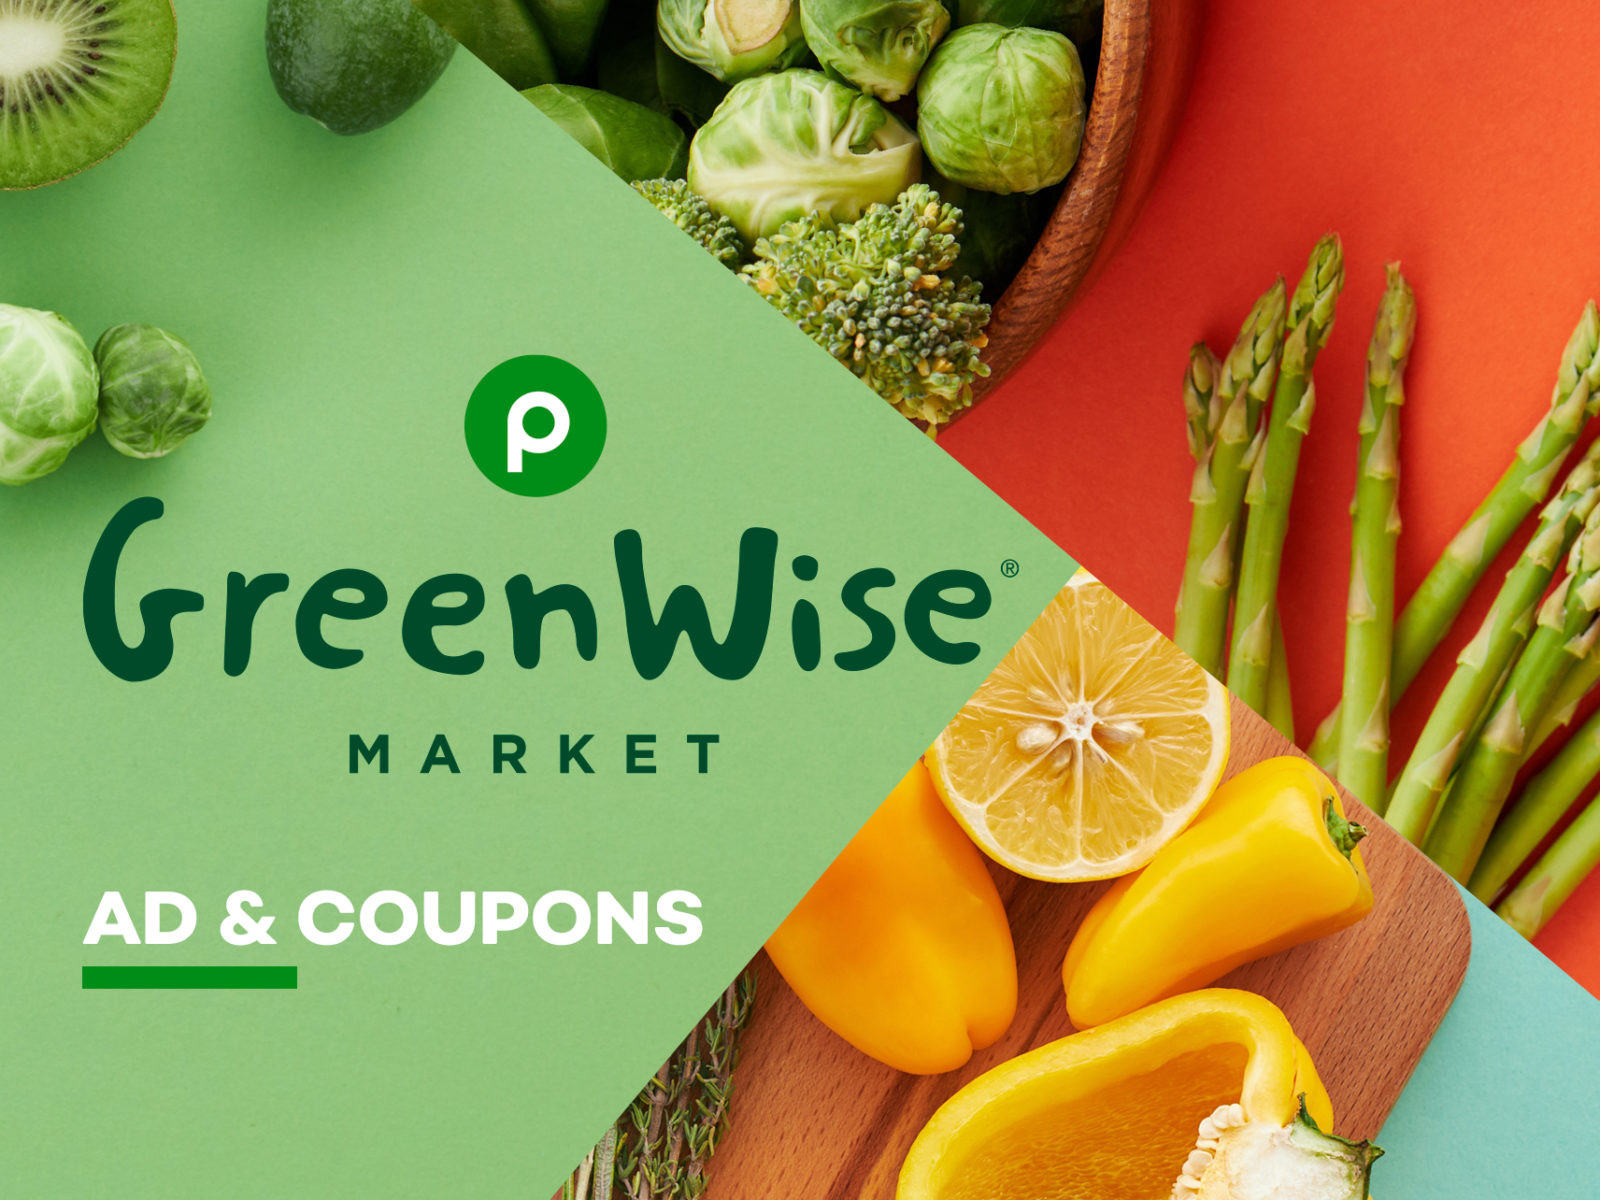 Publix GreenWise Market Ad & Coupons Week Of 8/31 to 9/6 (8/30 to 9/5 For Some)